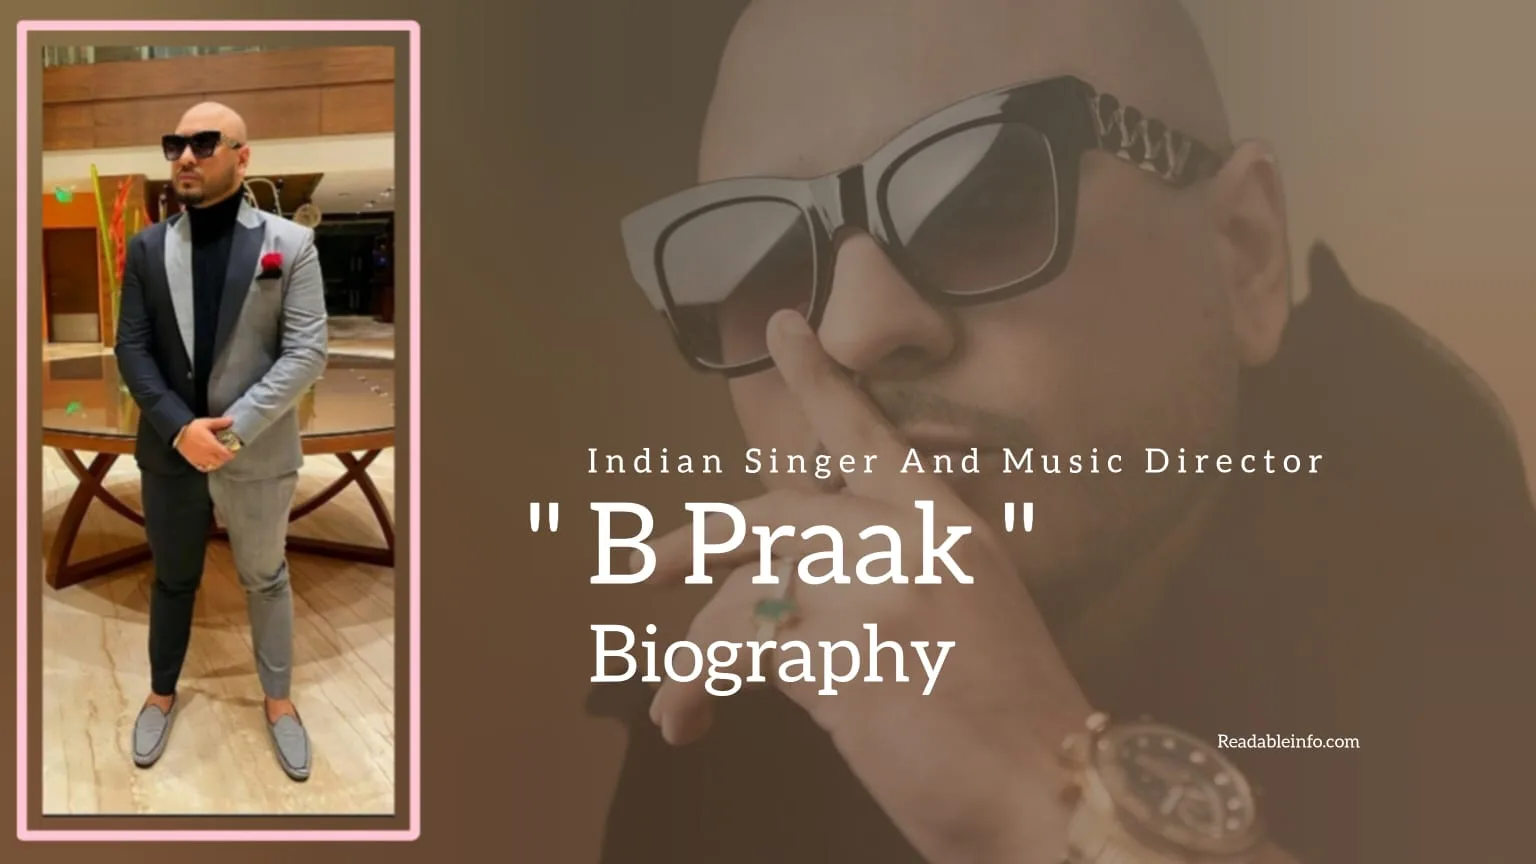 You are currently viewing B Praak Biography (Indian Singer And Music Director)